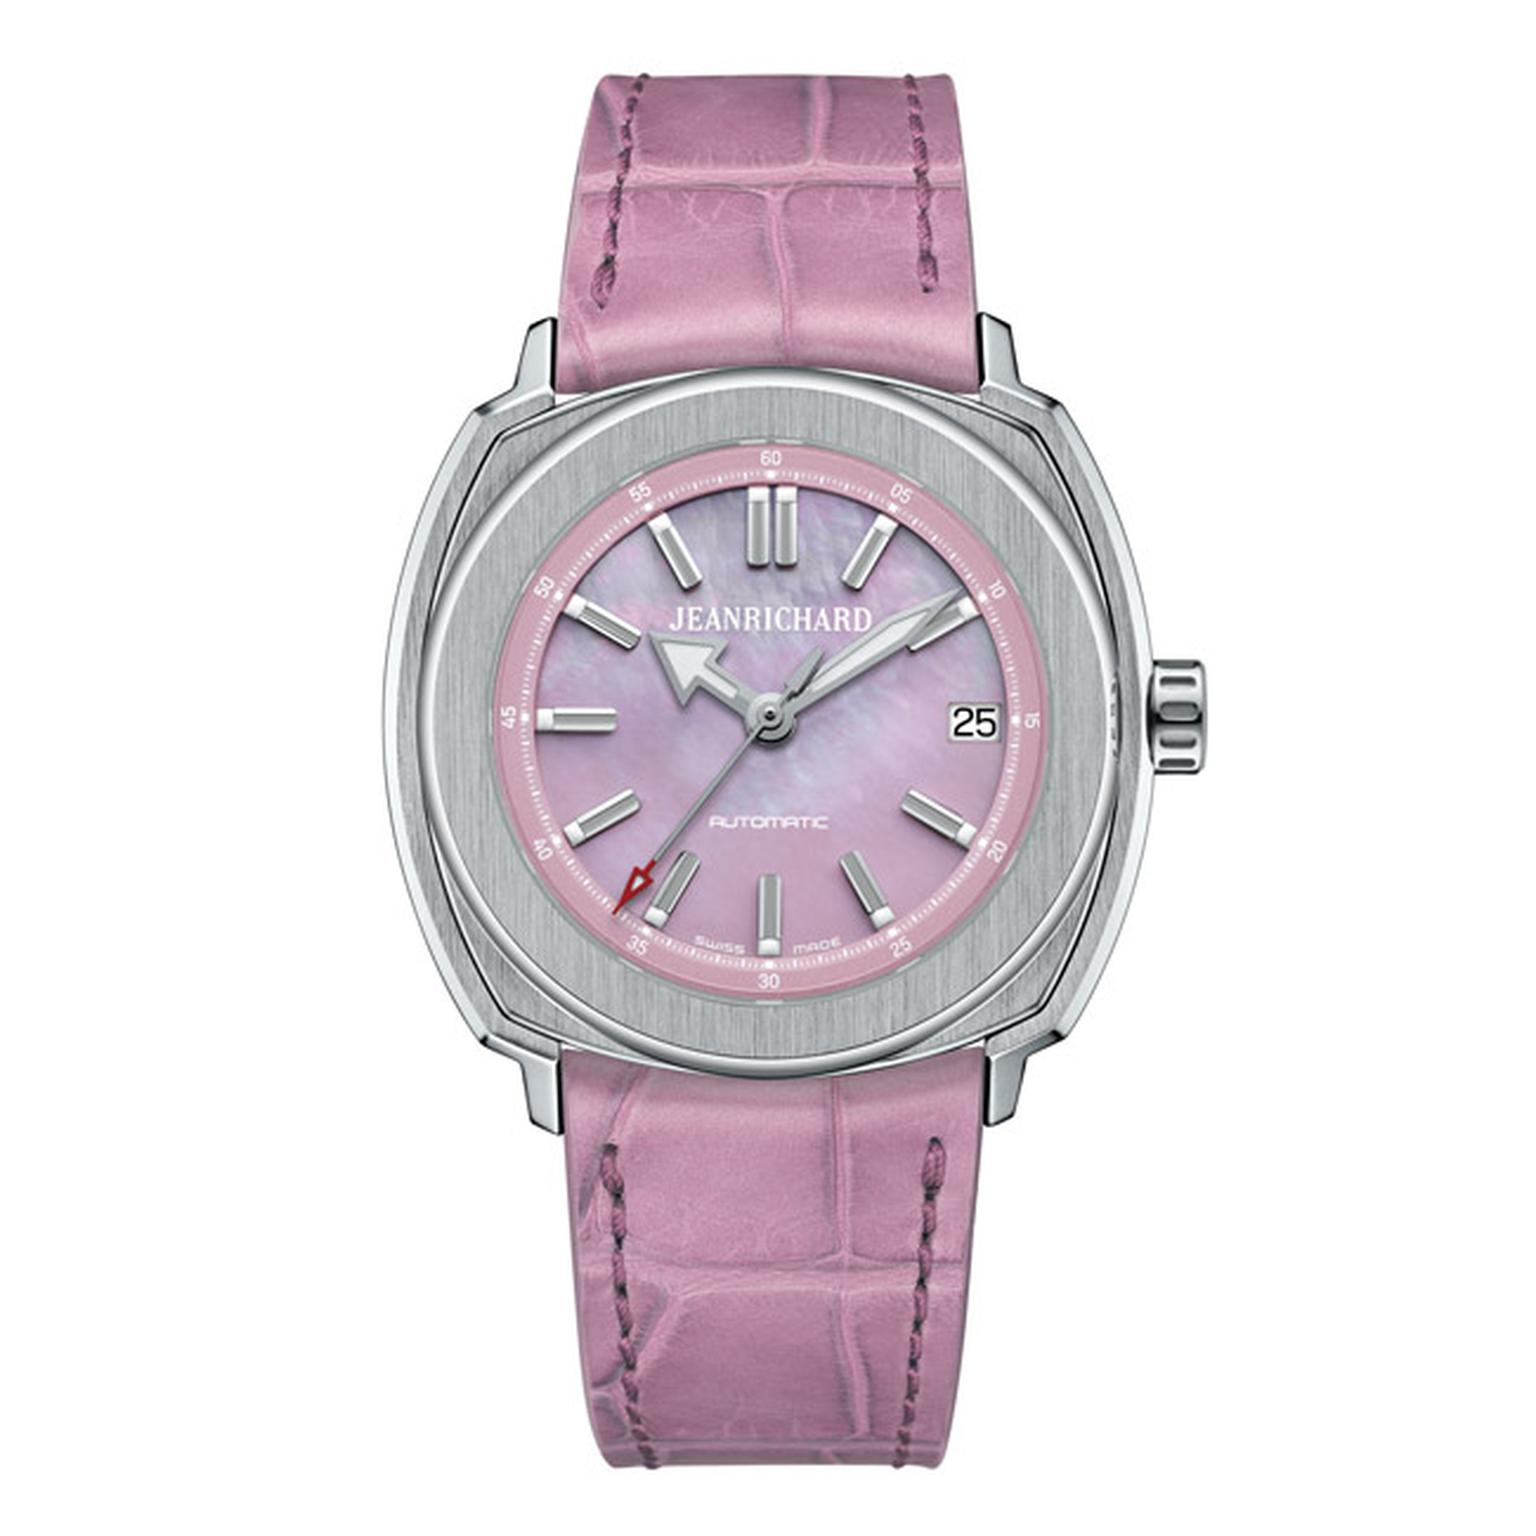 The most feminine of all of these new Terrascope watches is this JeanRichard Terrascope watch with a pink mother-of-pearl dial.